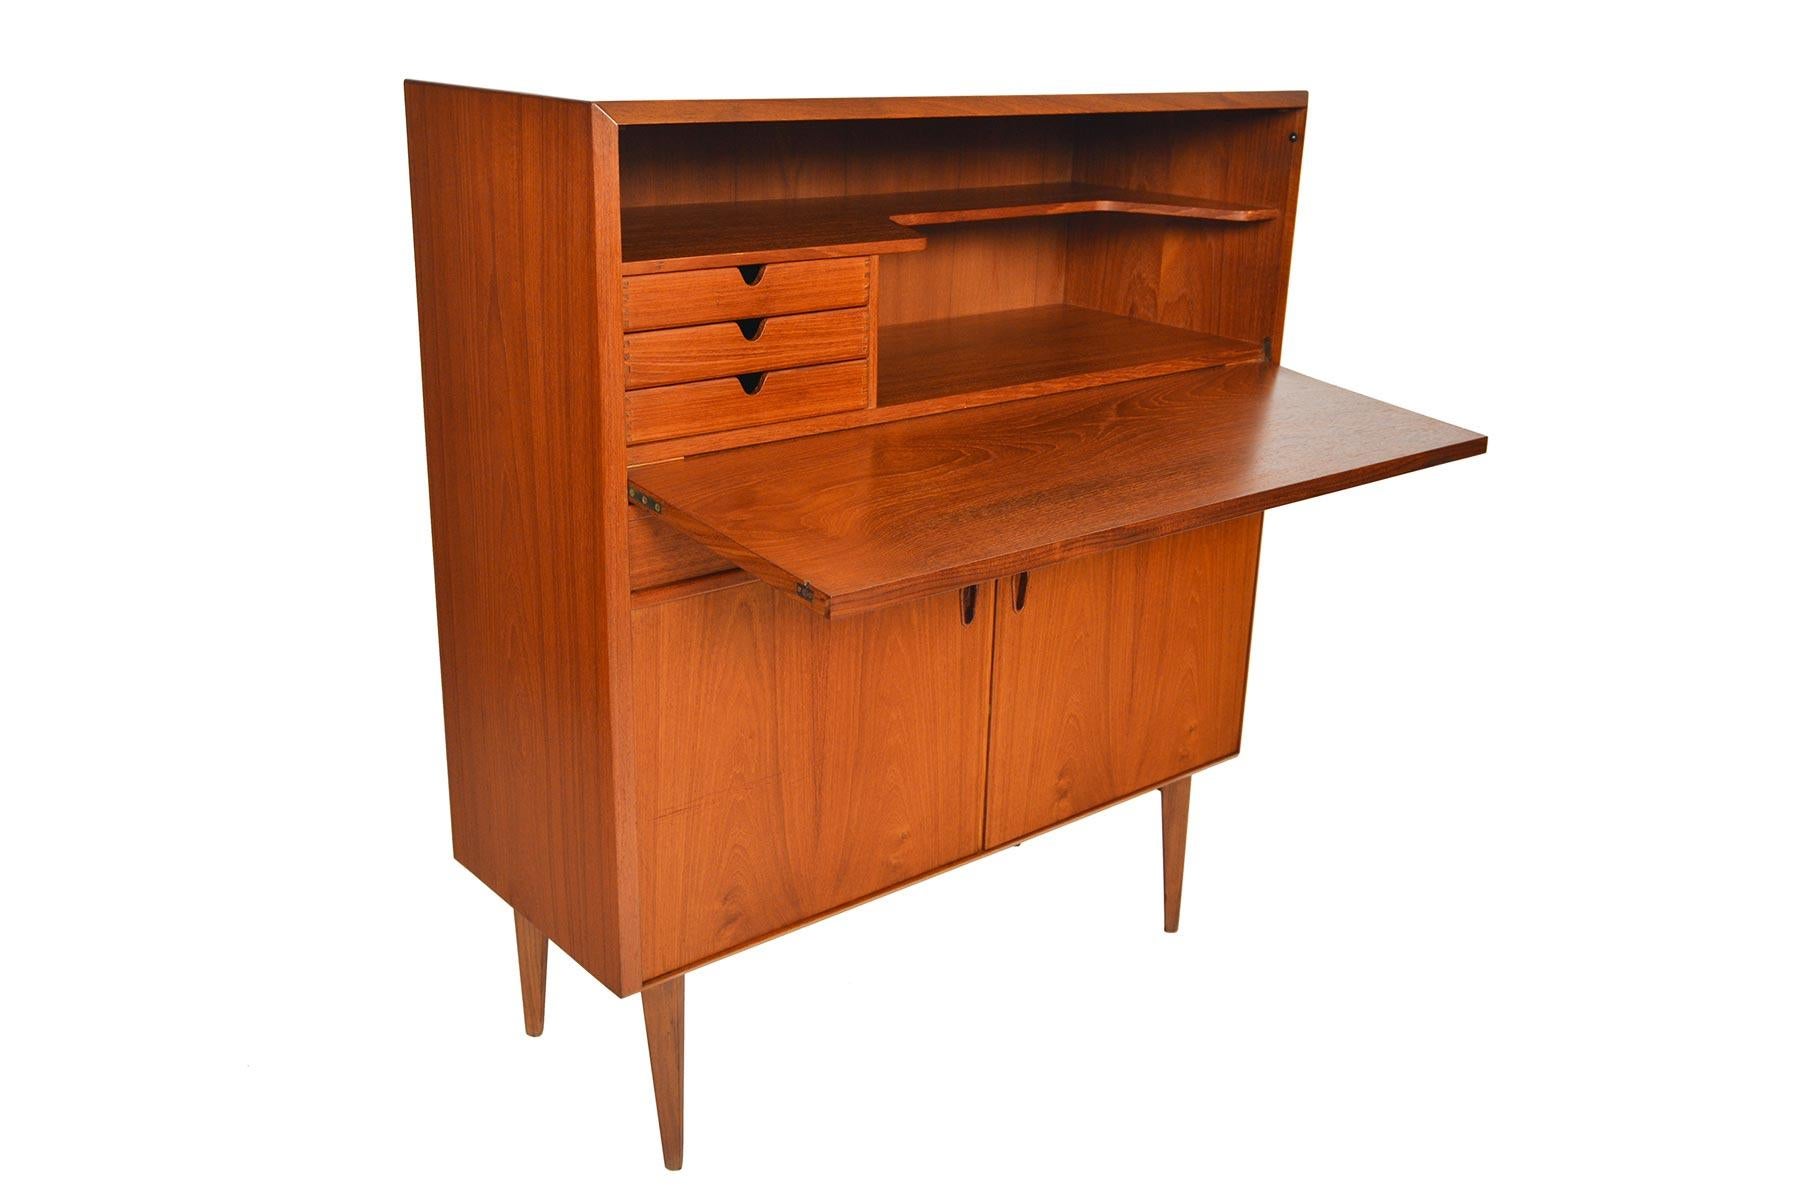 This wonderful Mid-Century Modern dry bar in teak was designed by Arne Wahl Iversen in the 1960s. A large teak door drops to expose three drawers and a carved fixed shelf. Two drawers sit in the middle. Two lower doors open onto two bays with